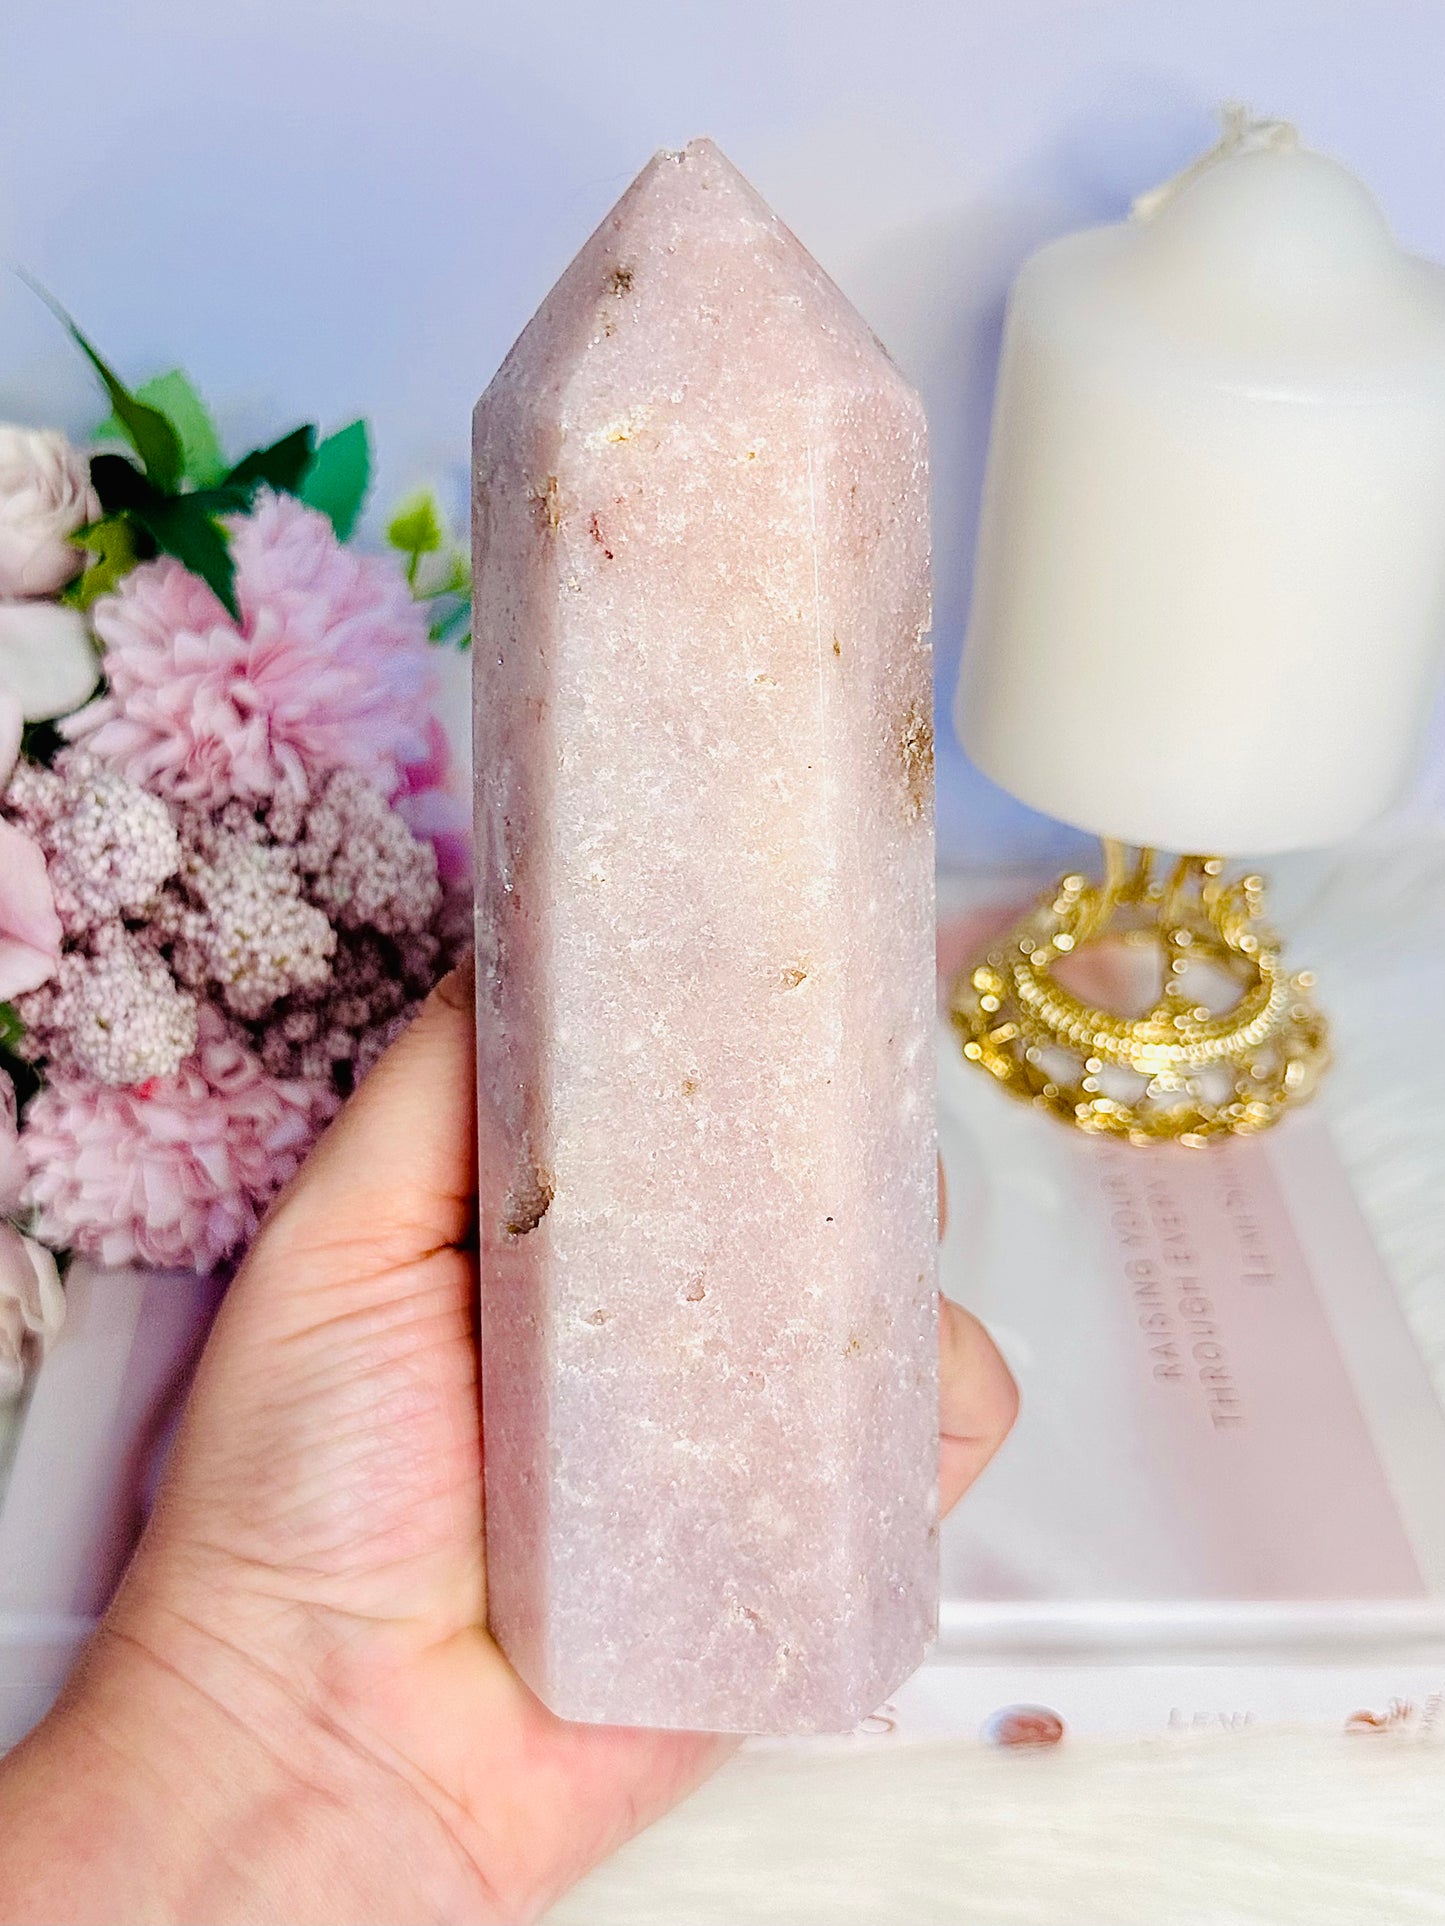 Stunning Large 17cm 642gram Druzy Pink Amethyst Chunky Tower From Brazil - Shiny Druzy At Tip Of Tower Not Chipped